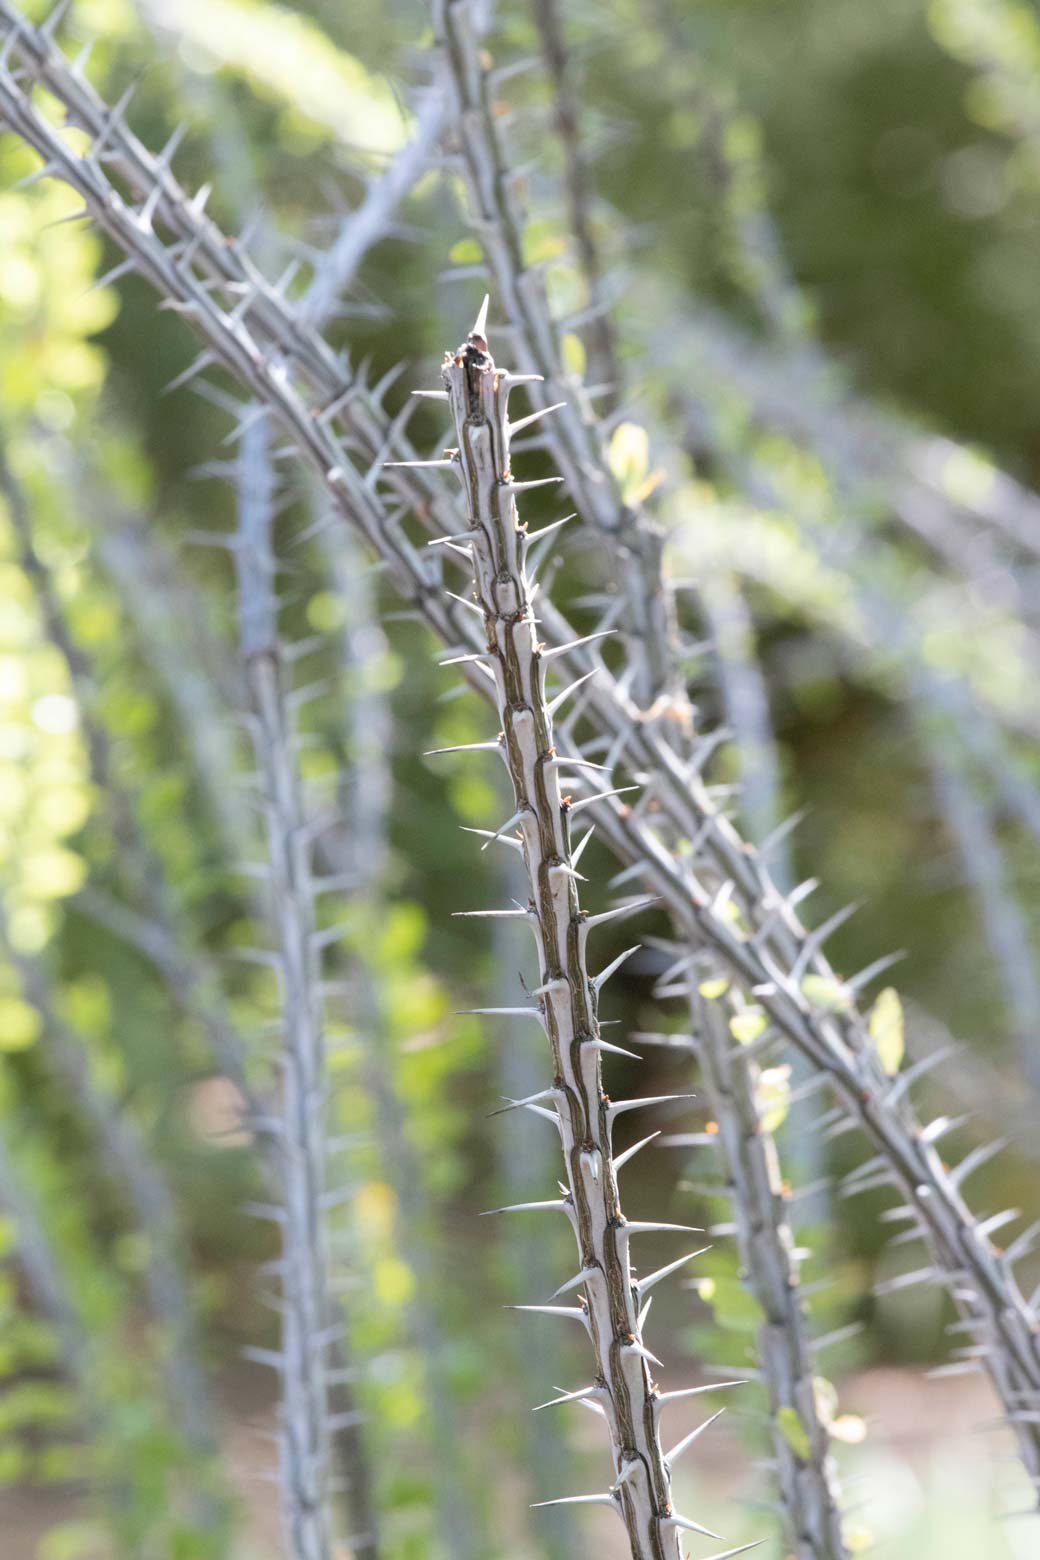 Bare Ocotillo branches with prominent thorns.